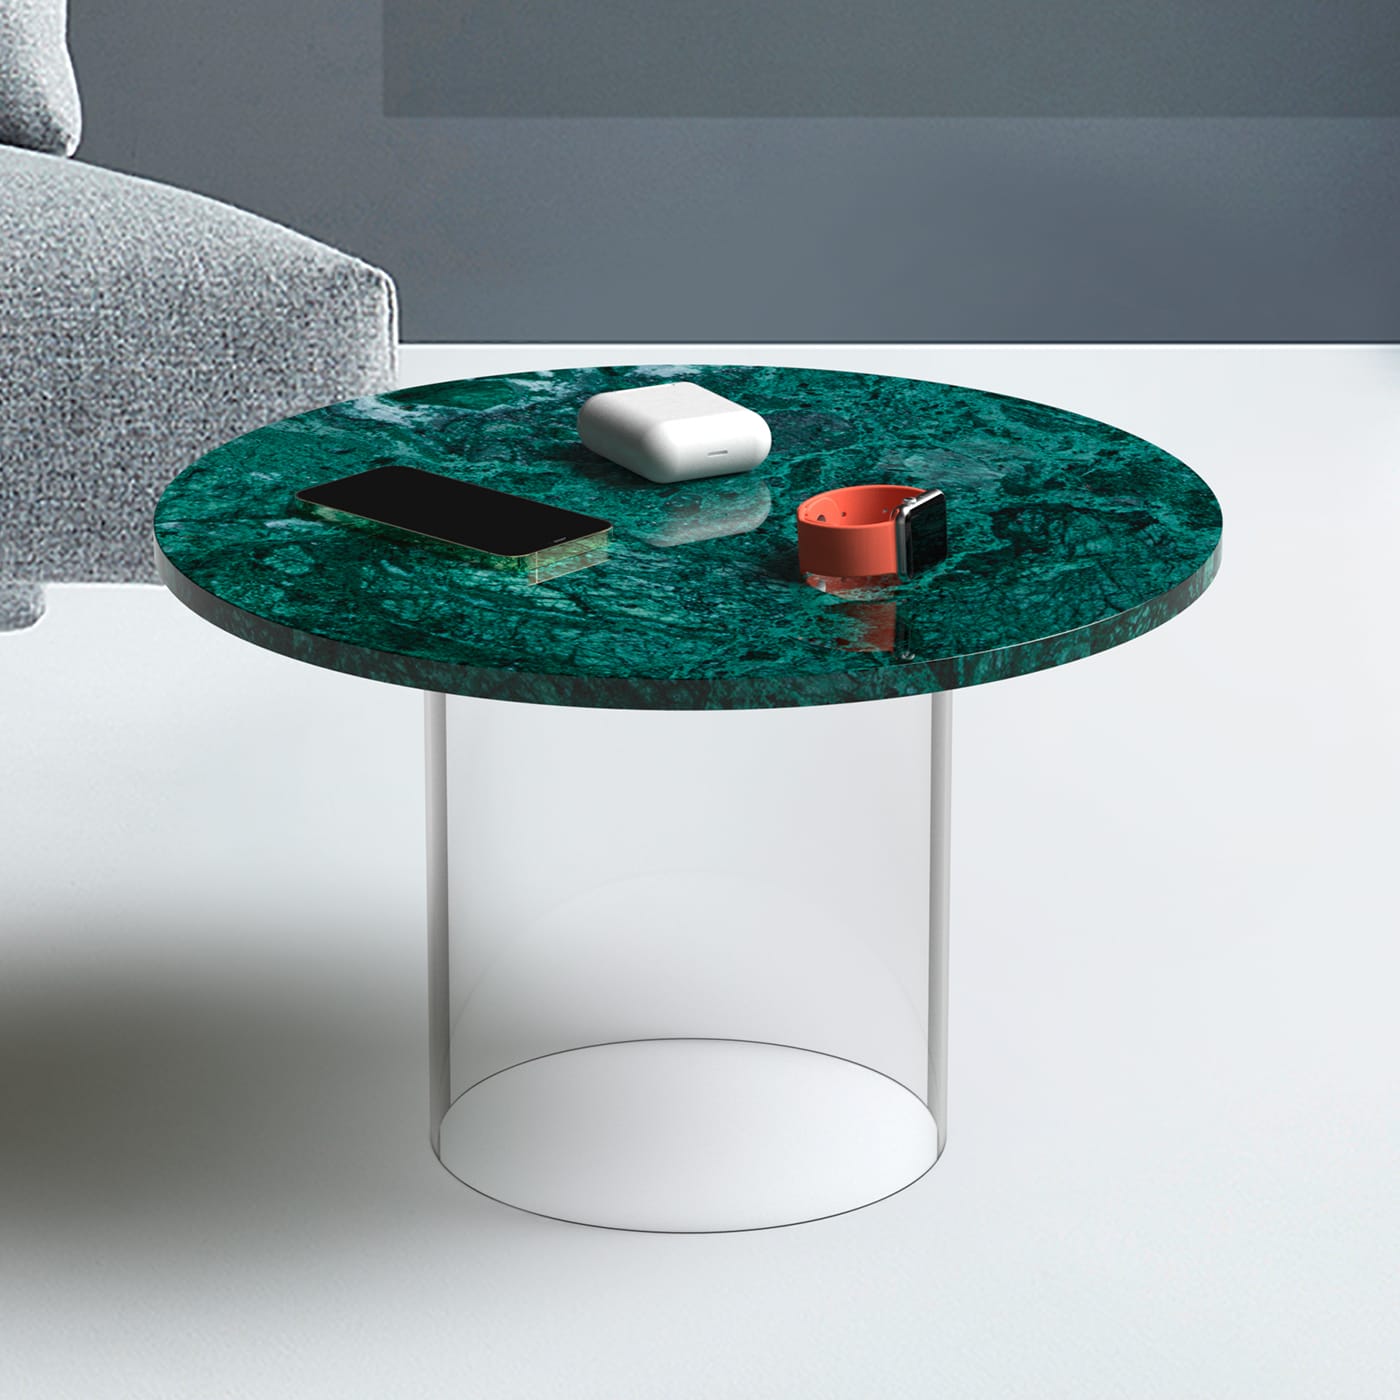 21st Century Guatemala Marble Coffee Table with Wireless Charger - [1+2=8]